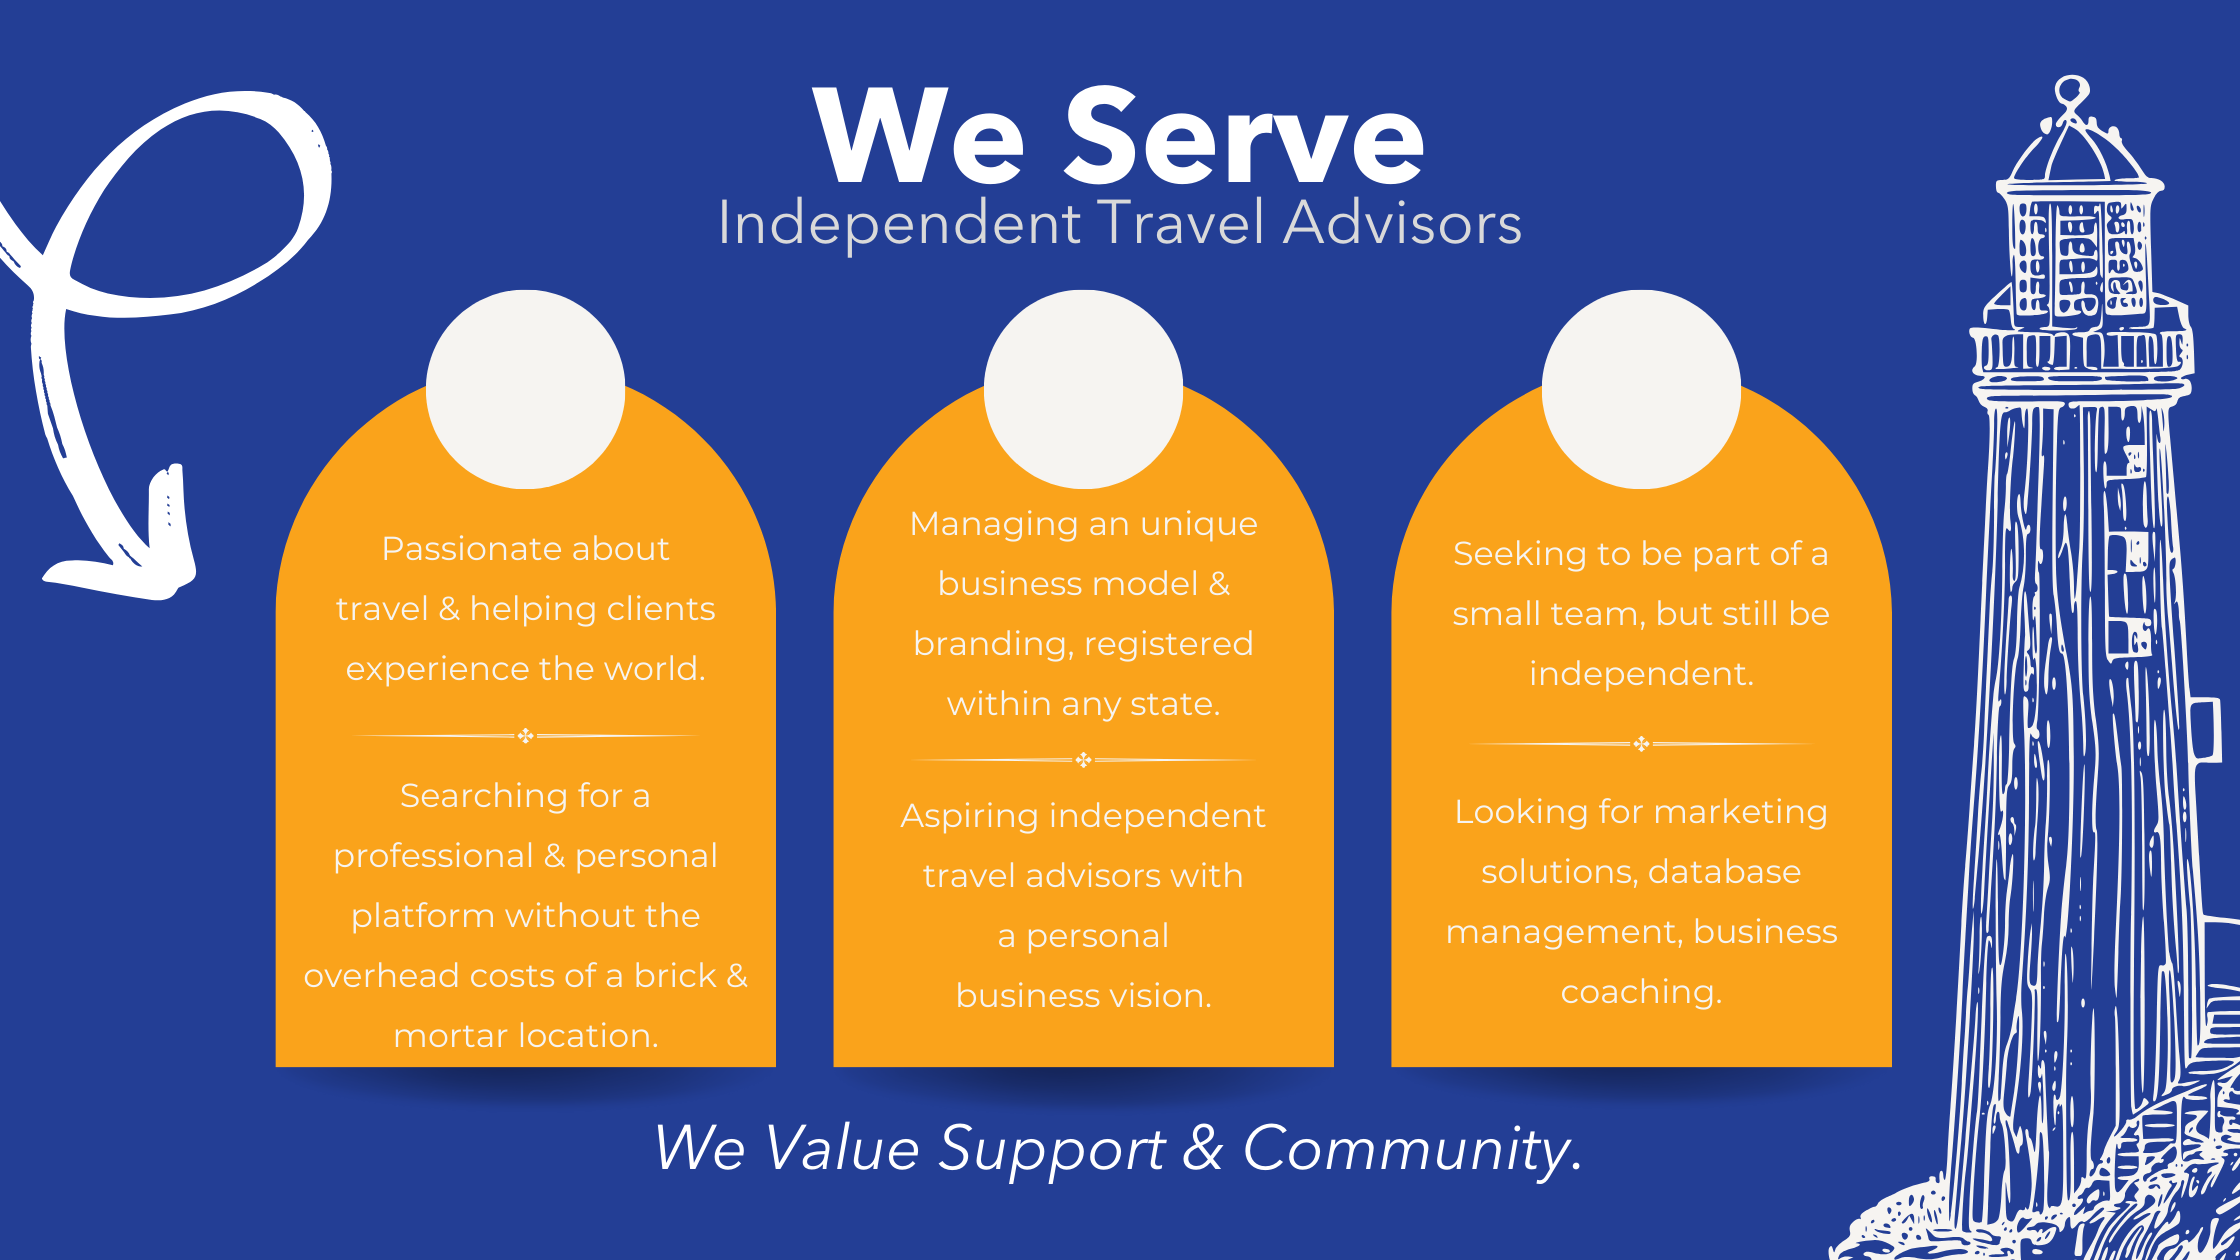 TRG - We Serve Independent Travel Advisors - Host Agency - Travel Resources Group